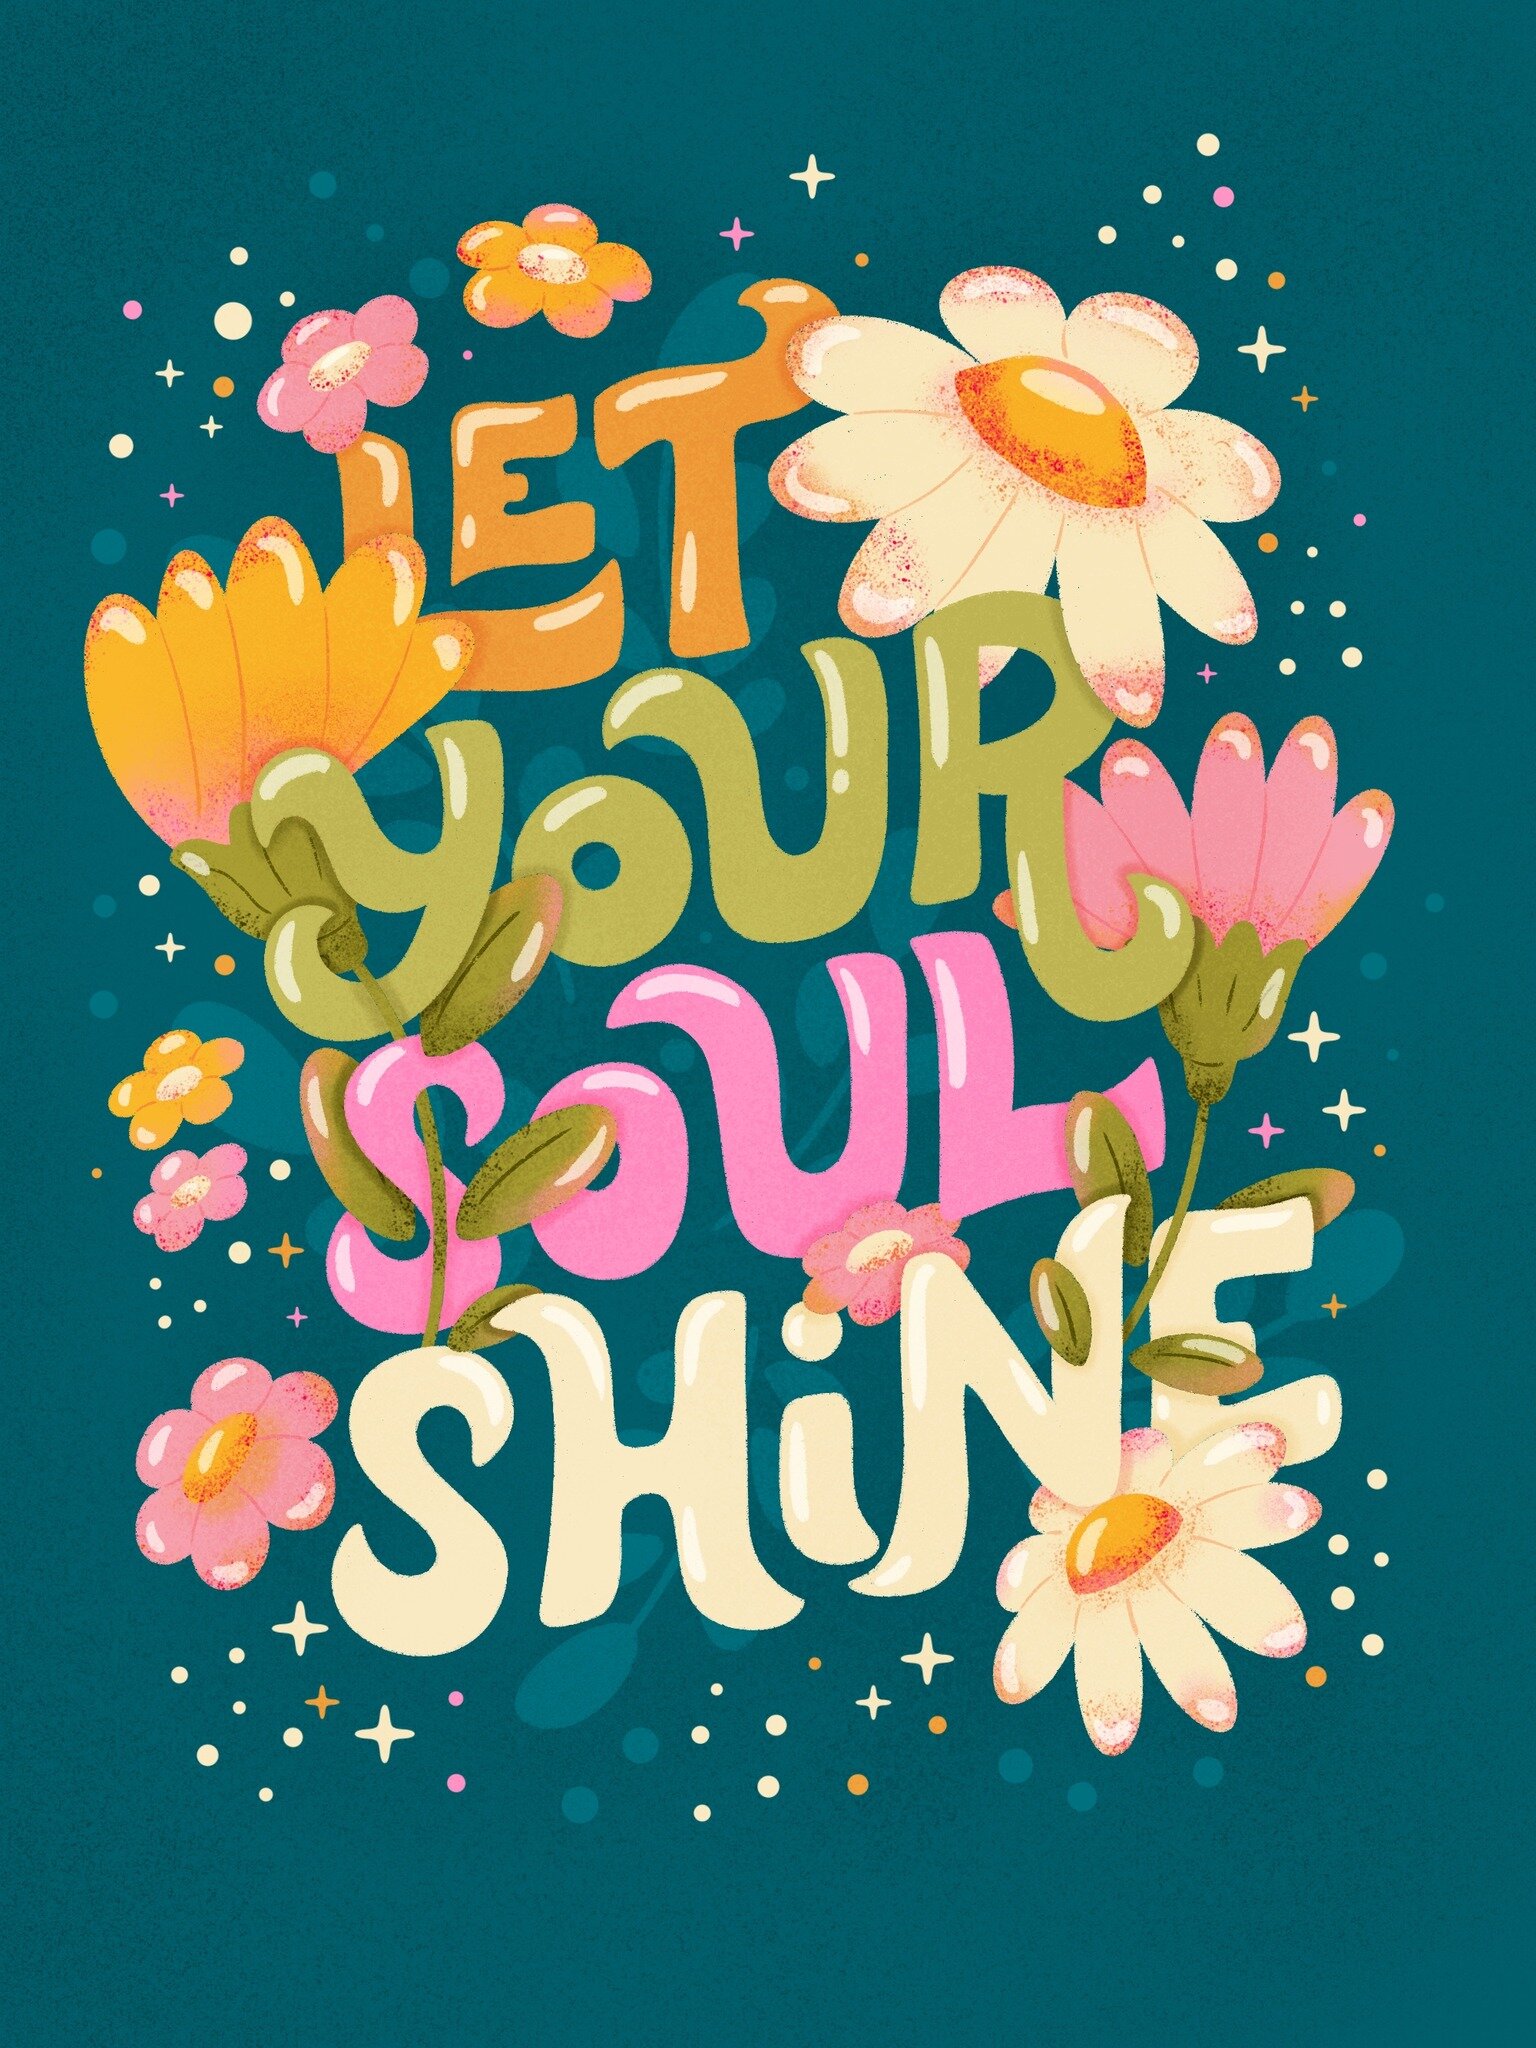 Our next spring prompt of #bloomandgrow2024 drawing challenge is LET YOUR SOUL SHINE

Thank you for all your uploads, keep them coming! ❤🌸

More about the challenge:
PROMPTS:
March 15-17 - Hello Spring
March 18-20 - Grow With The Flow
March 21-23 - 